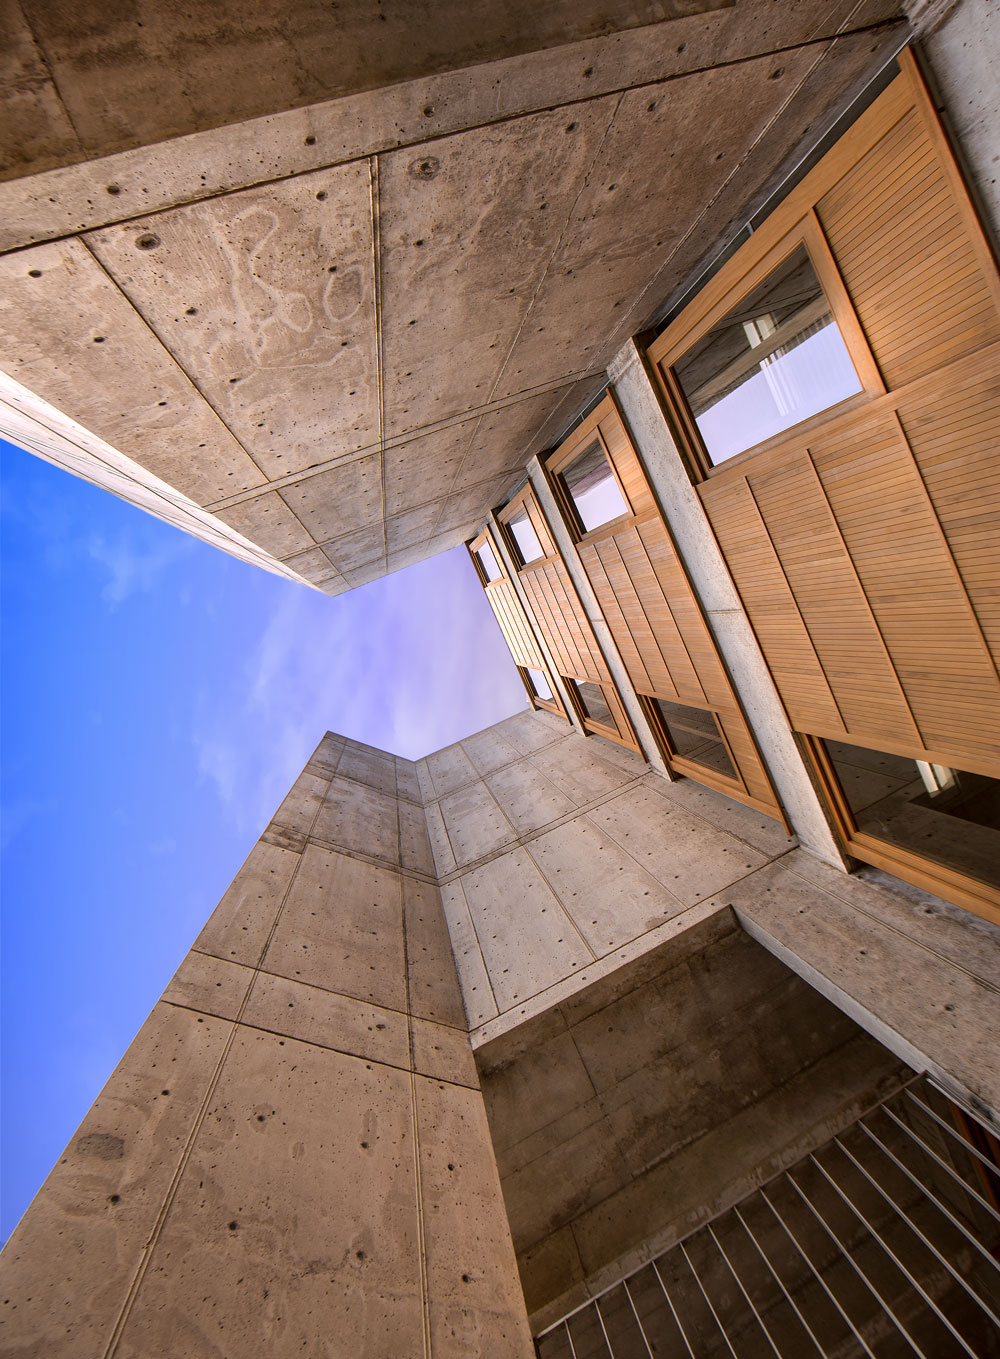 Conservation Management Plan. The Case of Salk Institute for